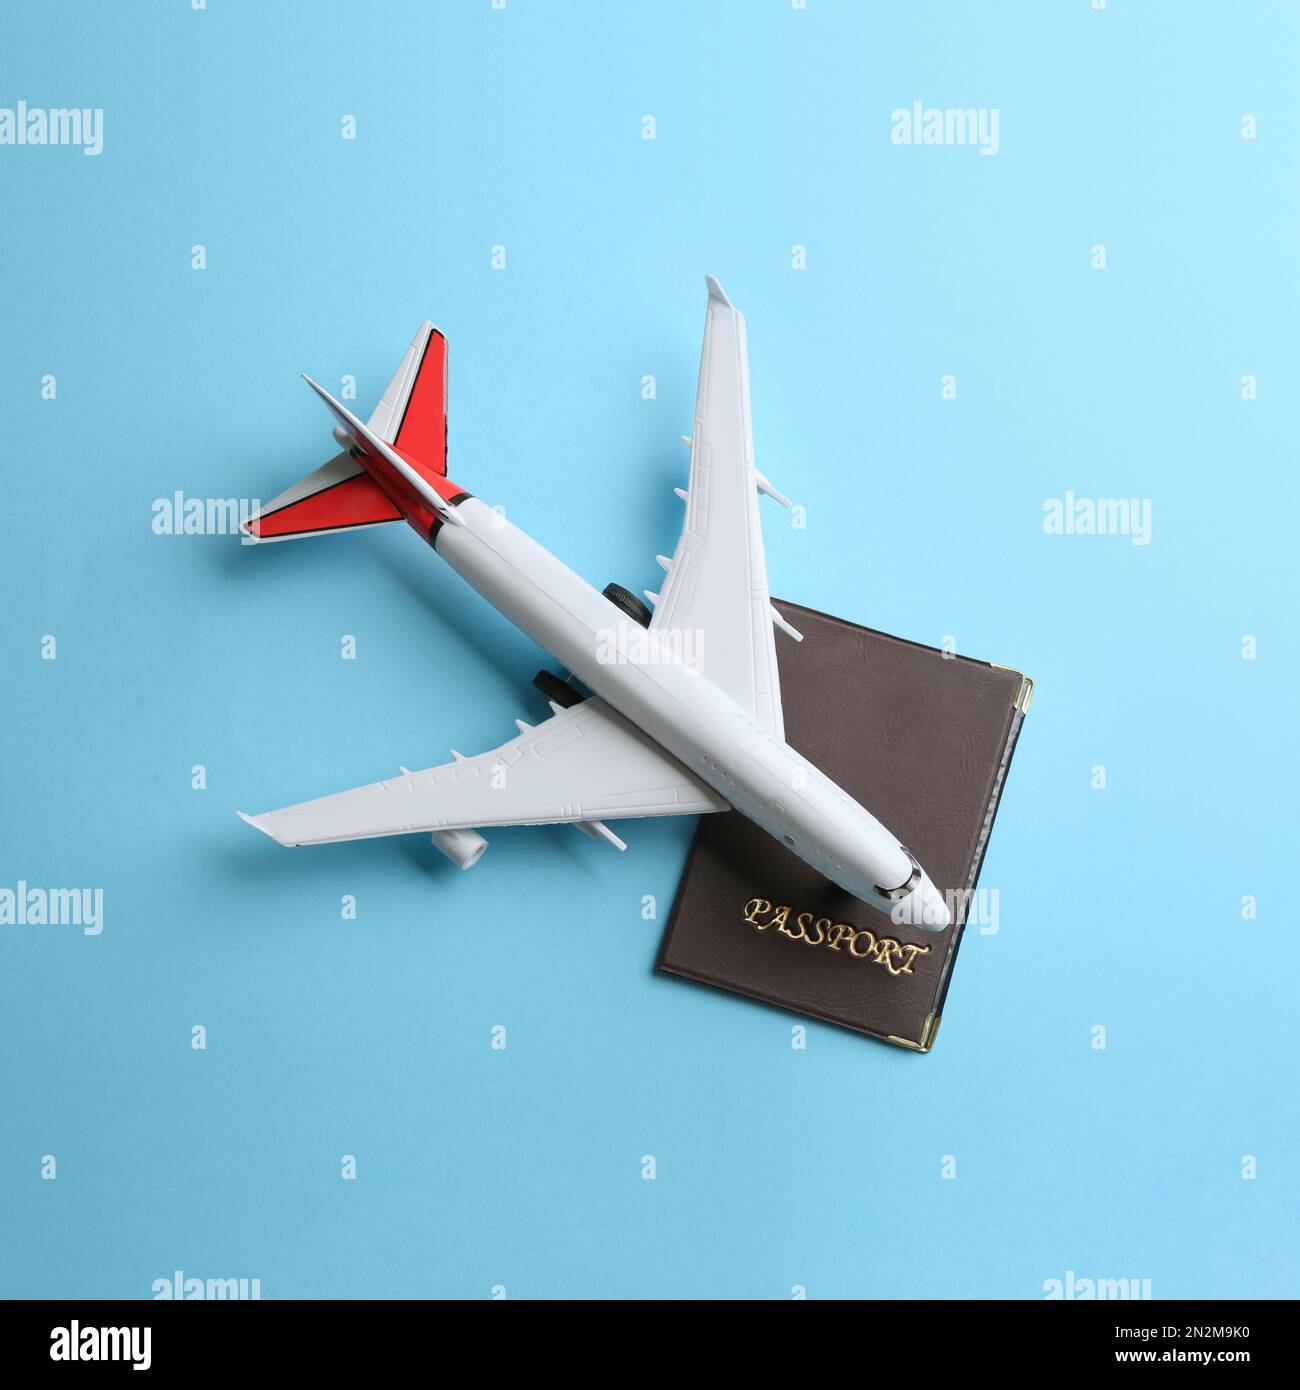 Toy airplane and passport on light blue background, flat lay Stock Photo